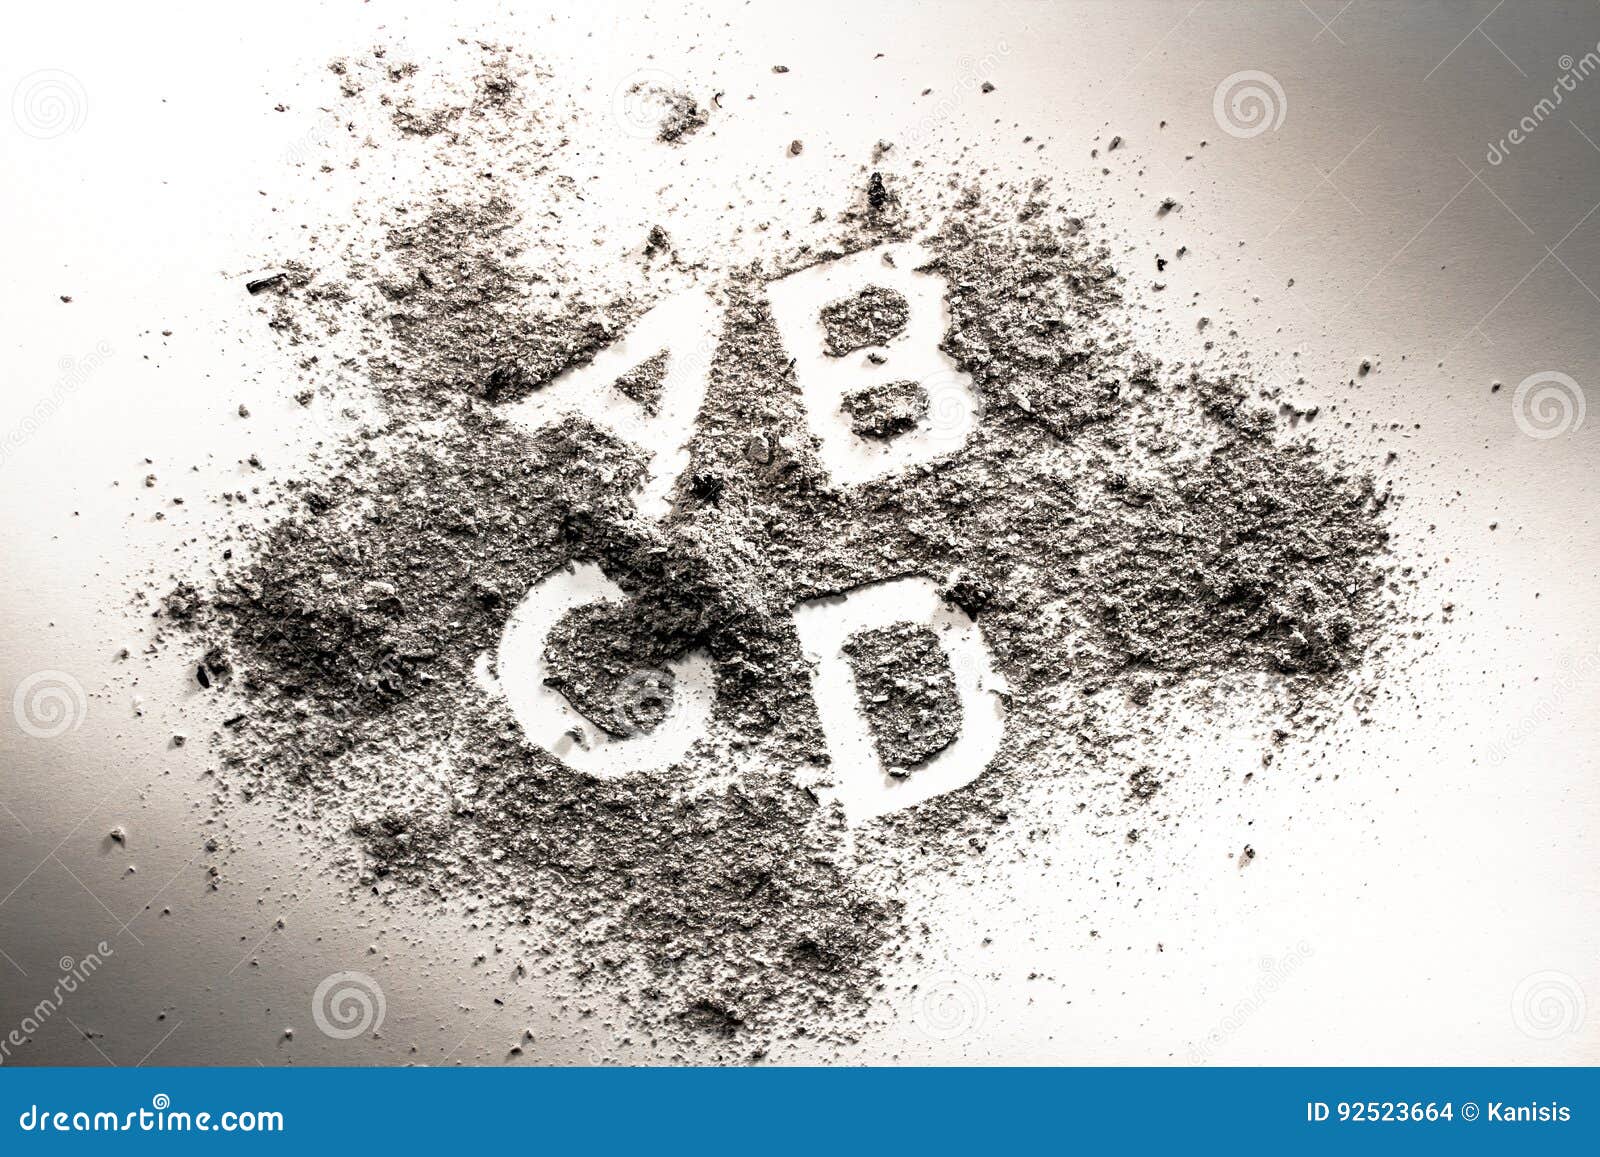 letters a, b, c, and d written in grey ash, sand, filth or dust